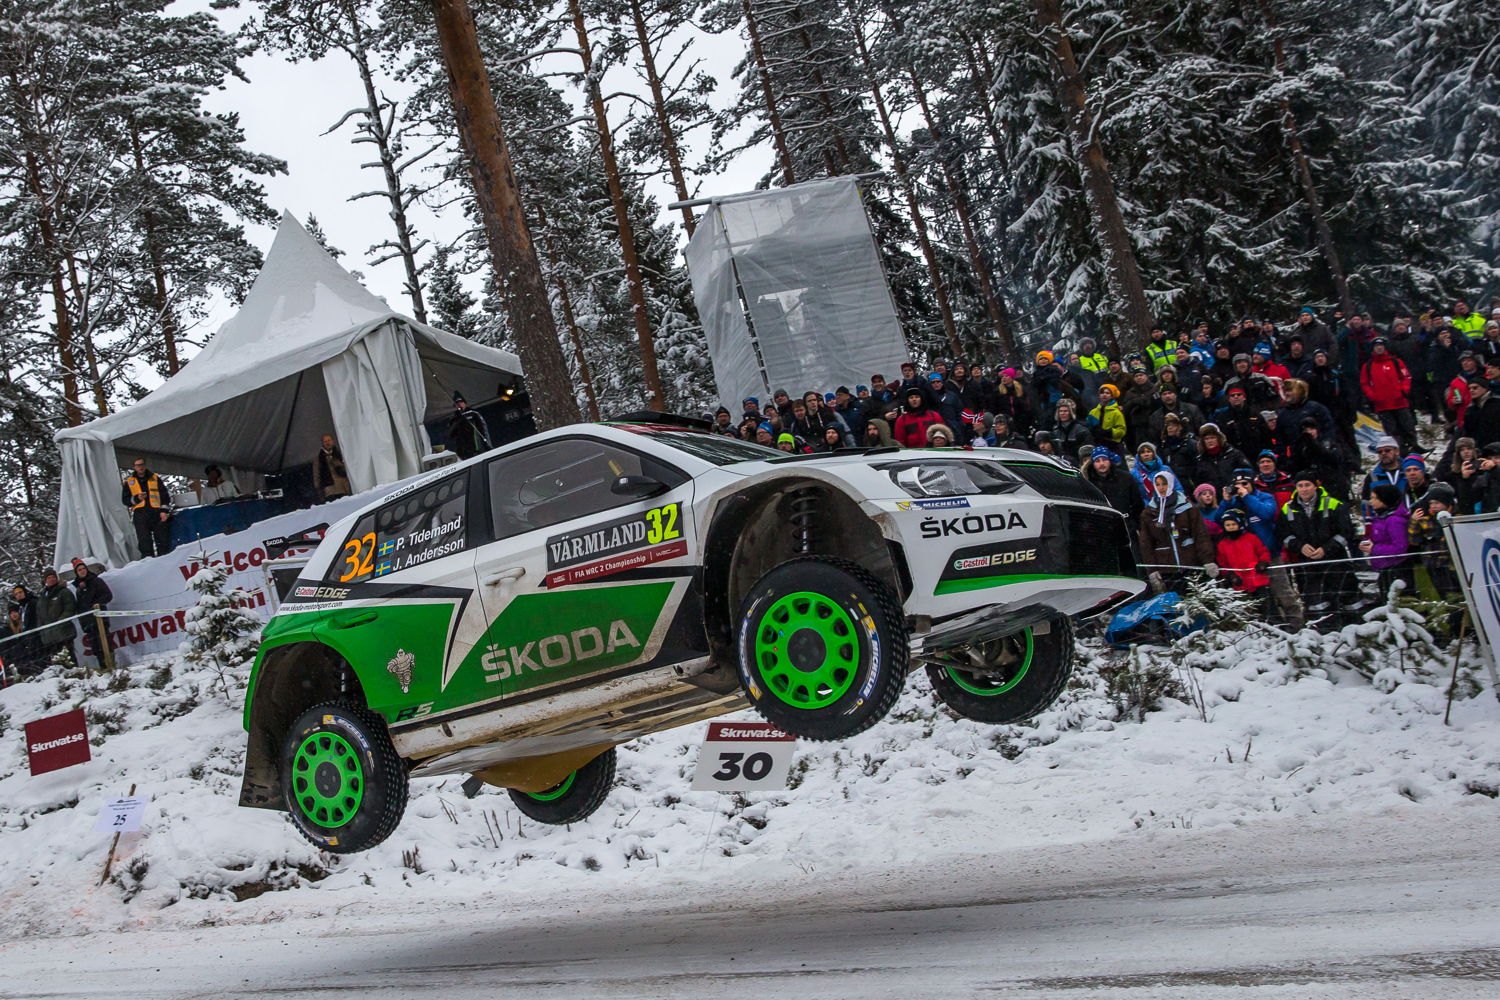 Last year, Tidemand/Andersson finished second in the WRC 2 class in Sweden.